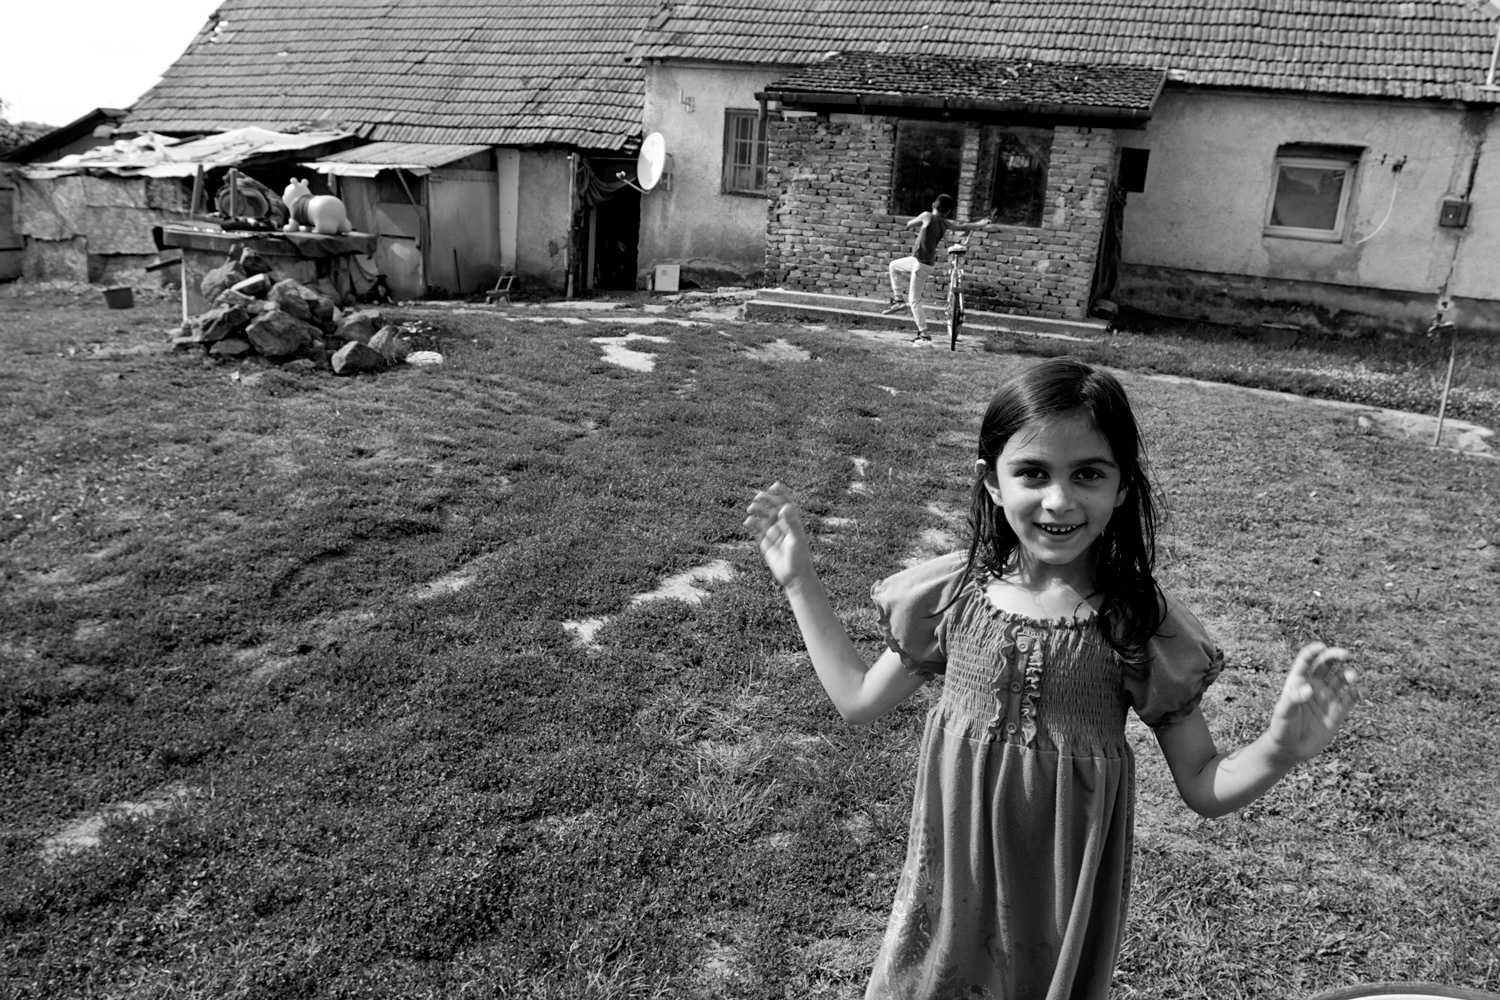 1.       Welcome to Pacsatüttös, a settlement of gypsies in the heart of Zala shire in southwest Hungary. The area was once part of the nearby city, Pacsa, but today the camp and the people are considered stateless, thus they don't exist on paper.2.        For the children of Pacsatüttös life is simple and uninterrupted by the hustle and bustle of modern-day Hungary. It's a place where money and means of making it is scarce, but this doesn't affect childhood innocence.